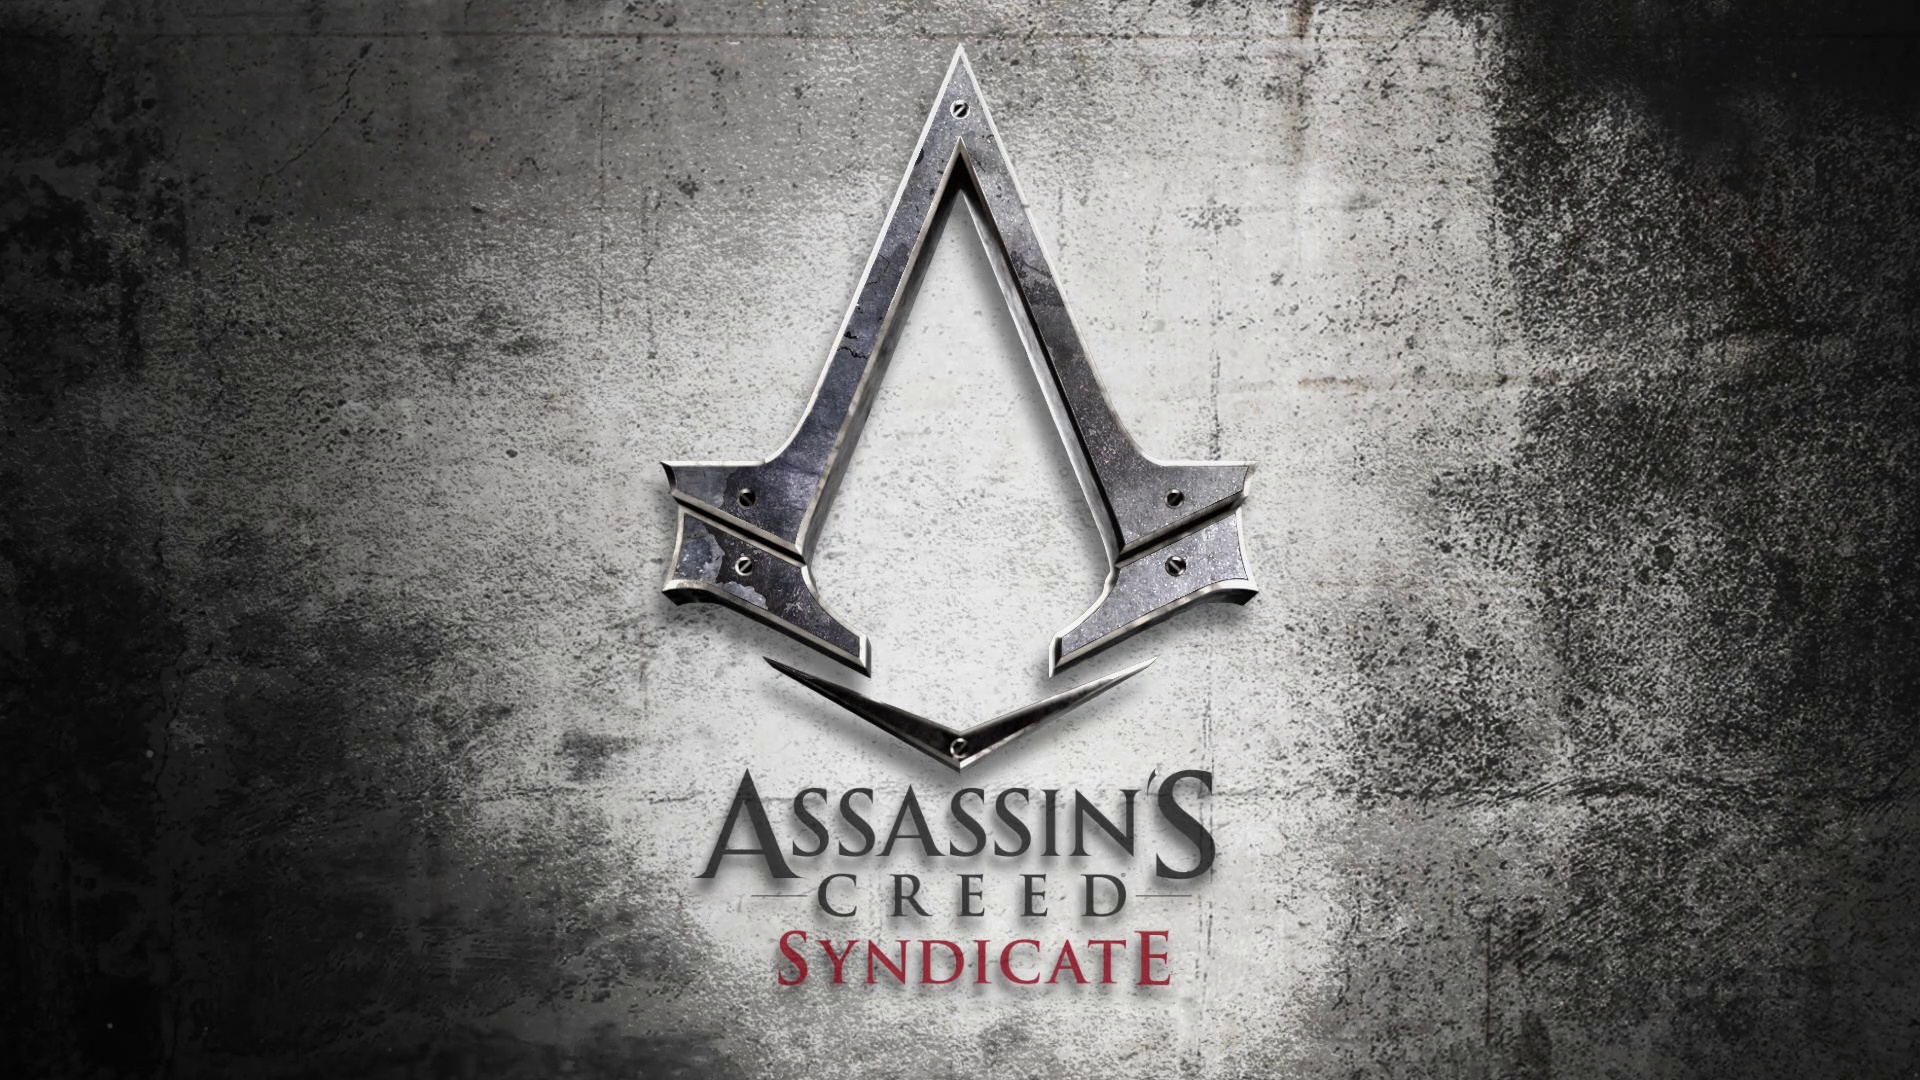 video game, assassin's creed: syndicate, logo, assassin's creed